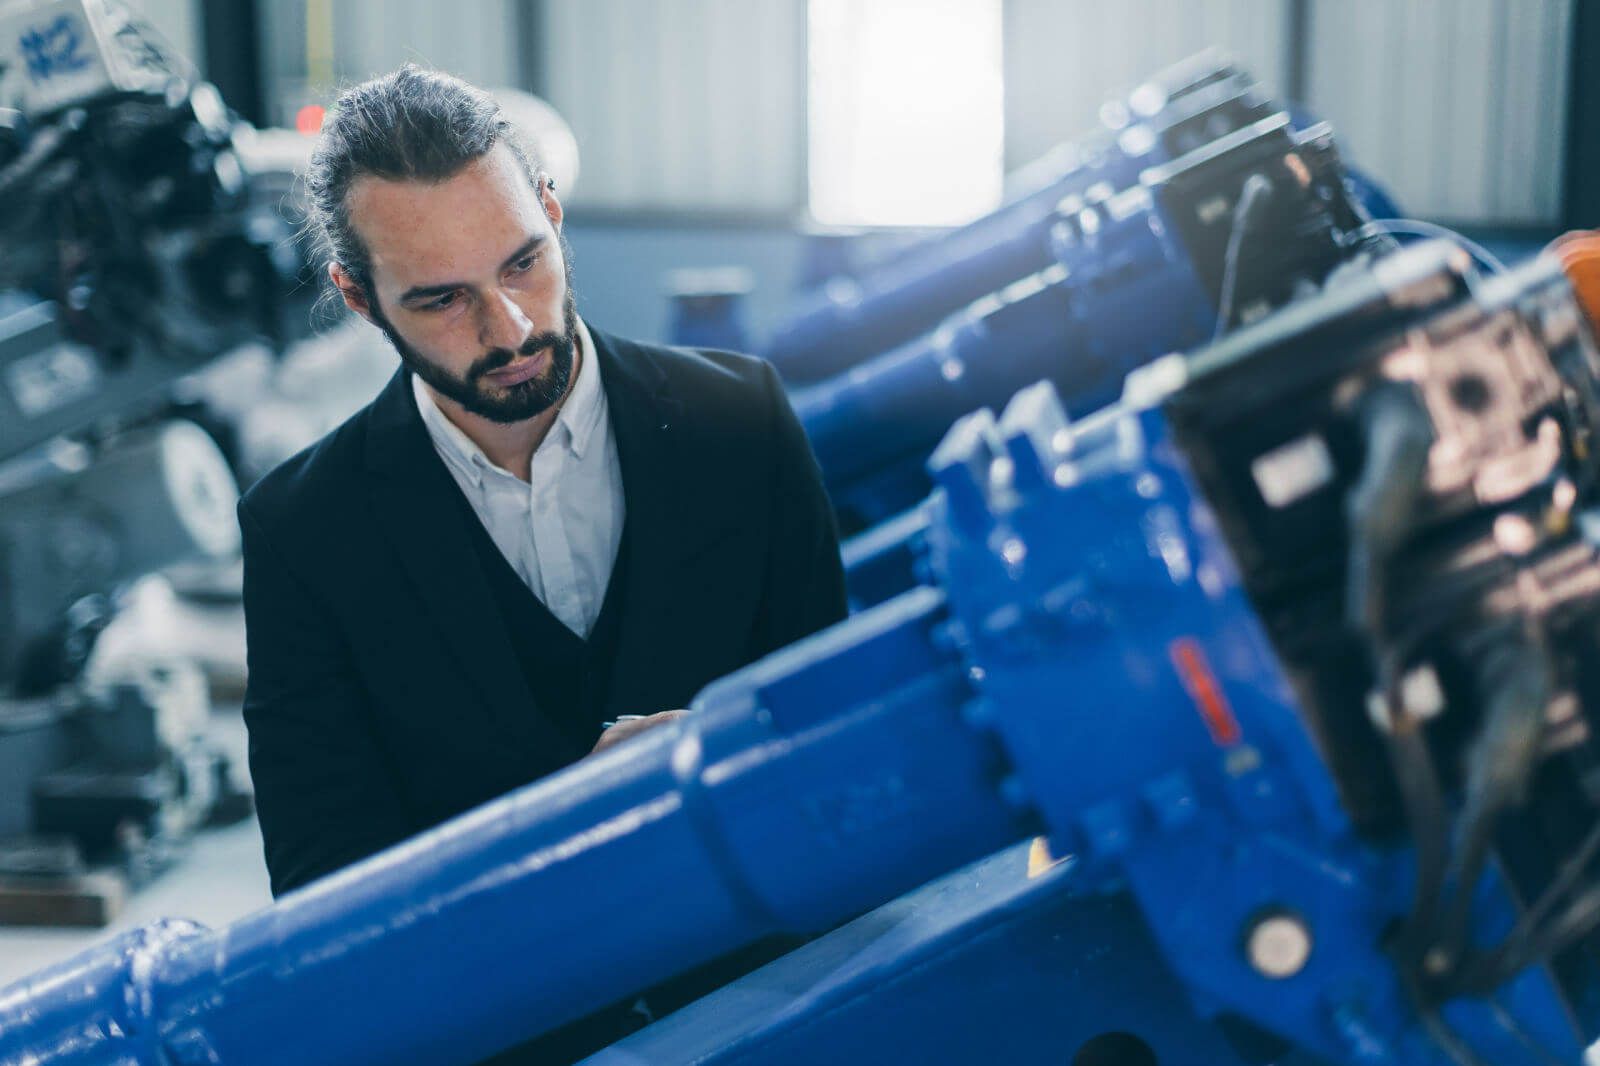 Businessman Manager In Suit Working In Machinery